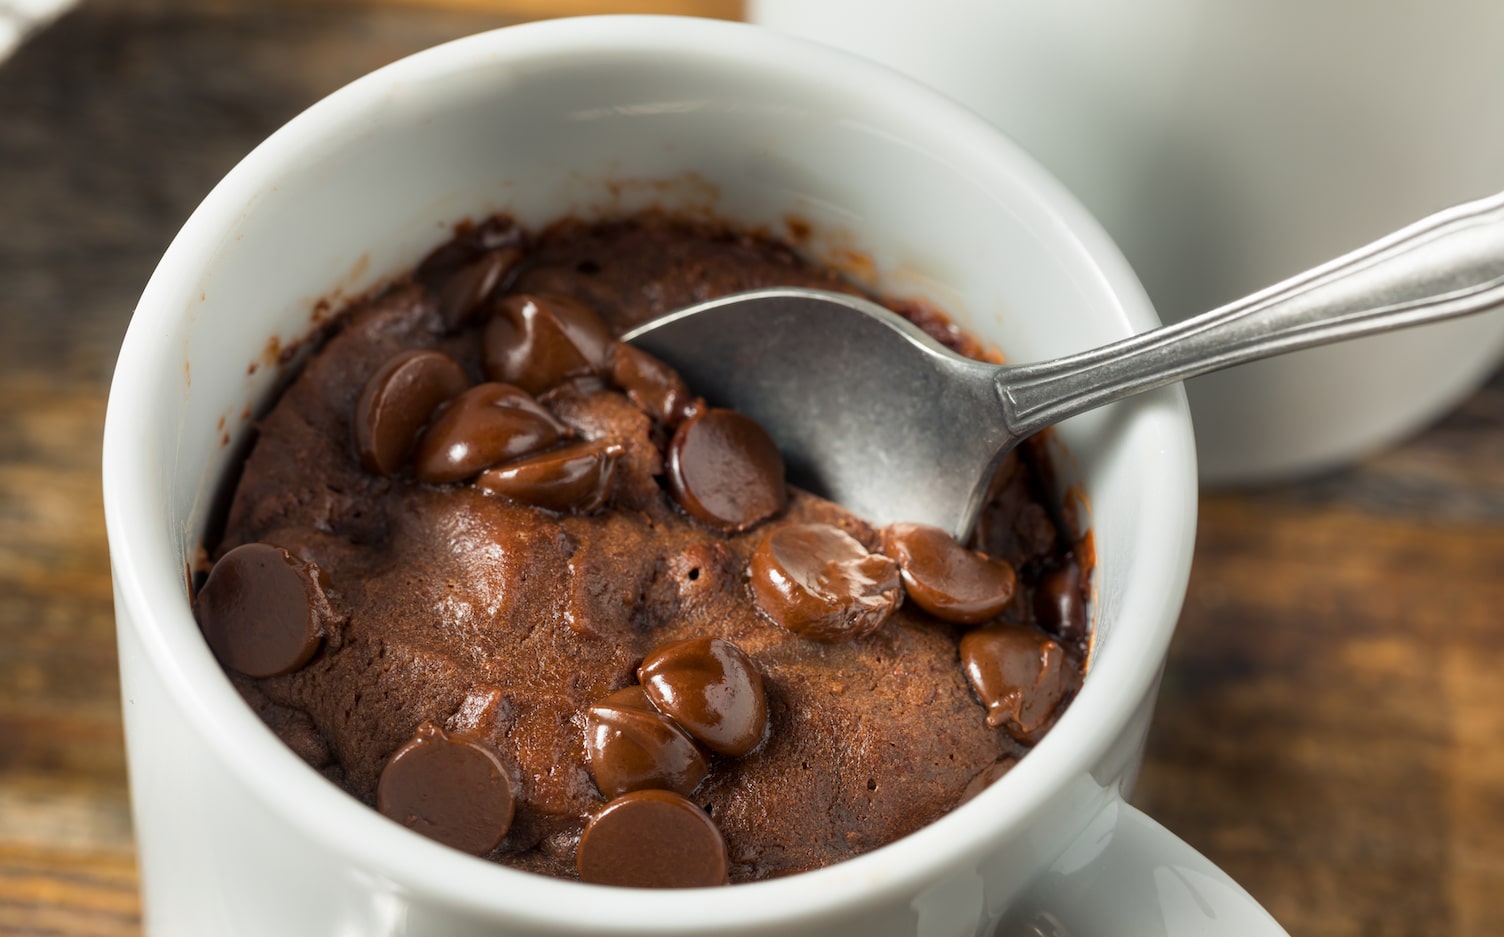 Whip Up This Single-Serve High-Protein Brownie in Minutes | MyFitnessPal